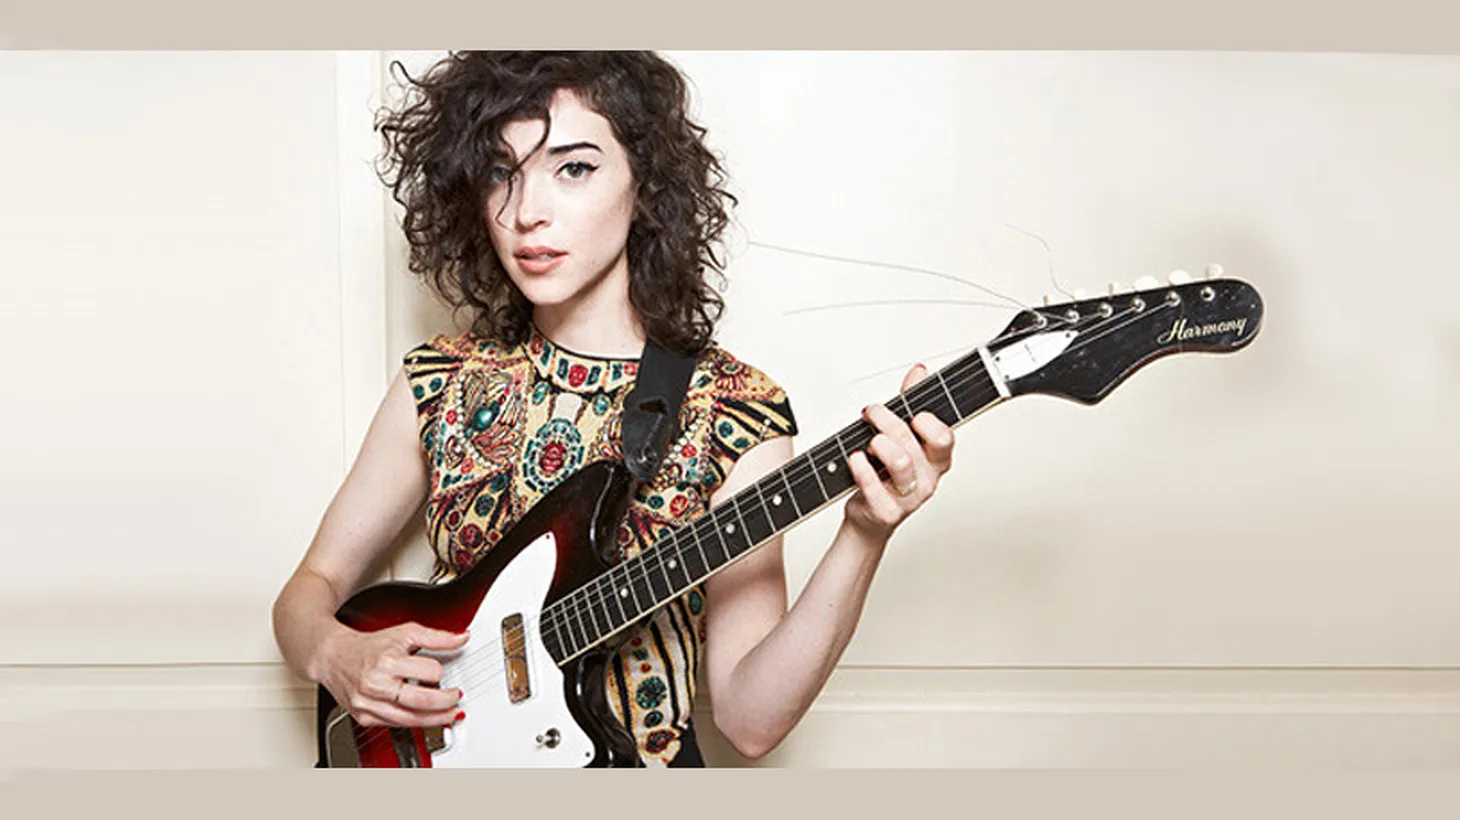 Singer-songwriter Annie Clark, the genius behind St. Vincent, shares some of her favorite songs by other artists and premieres her forthcoming album. (10 o'clock hour)